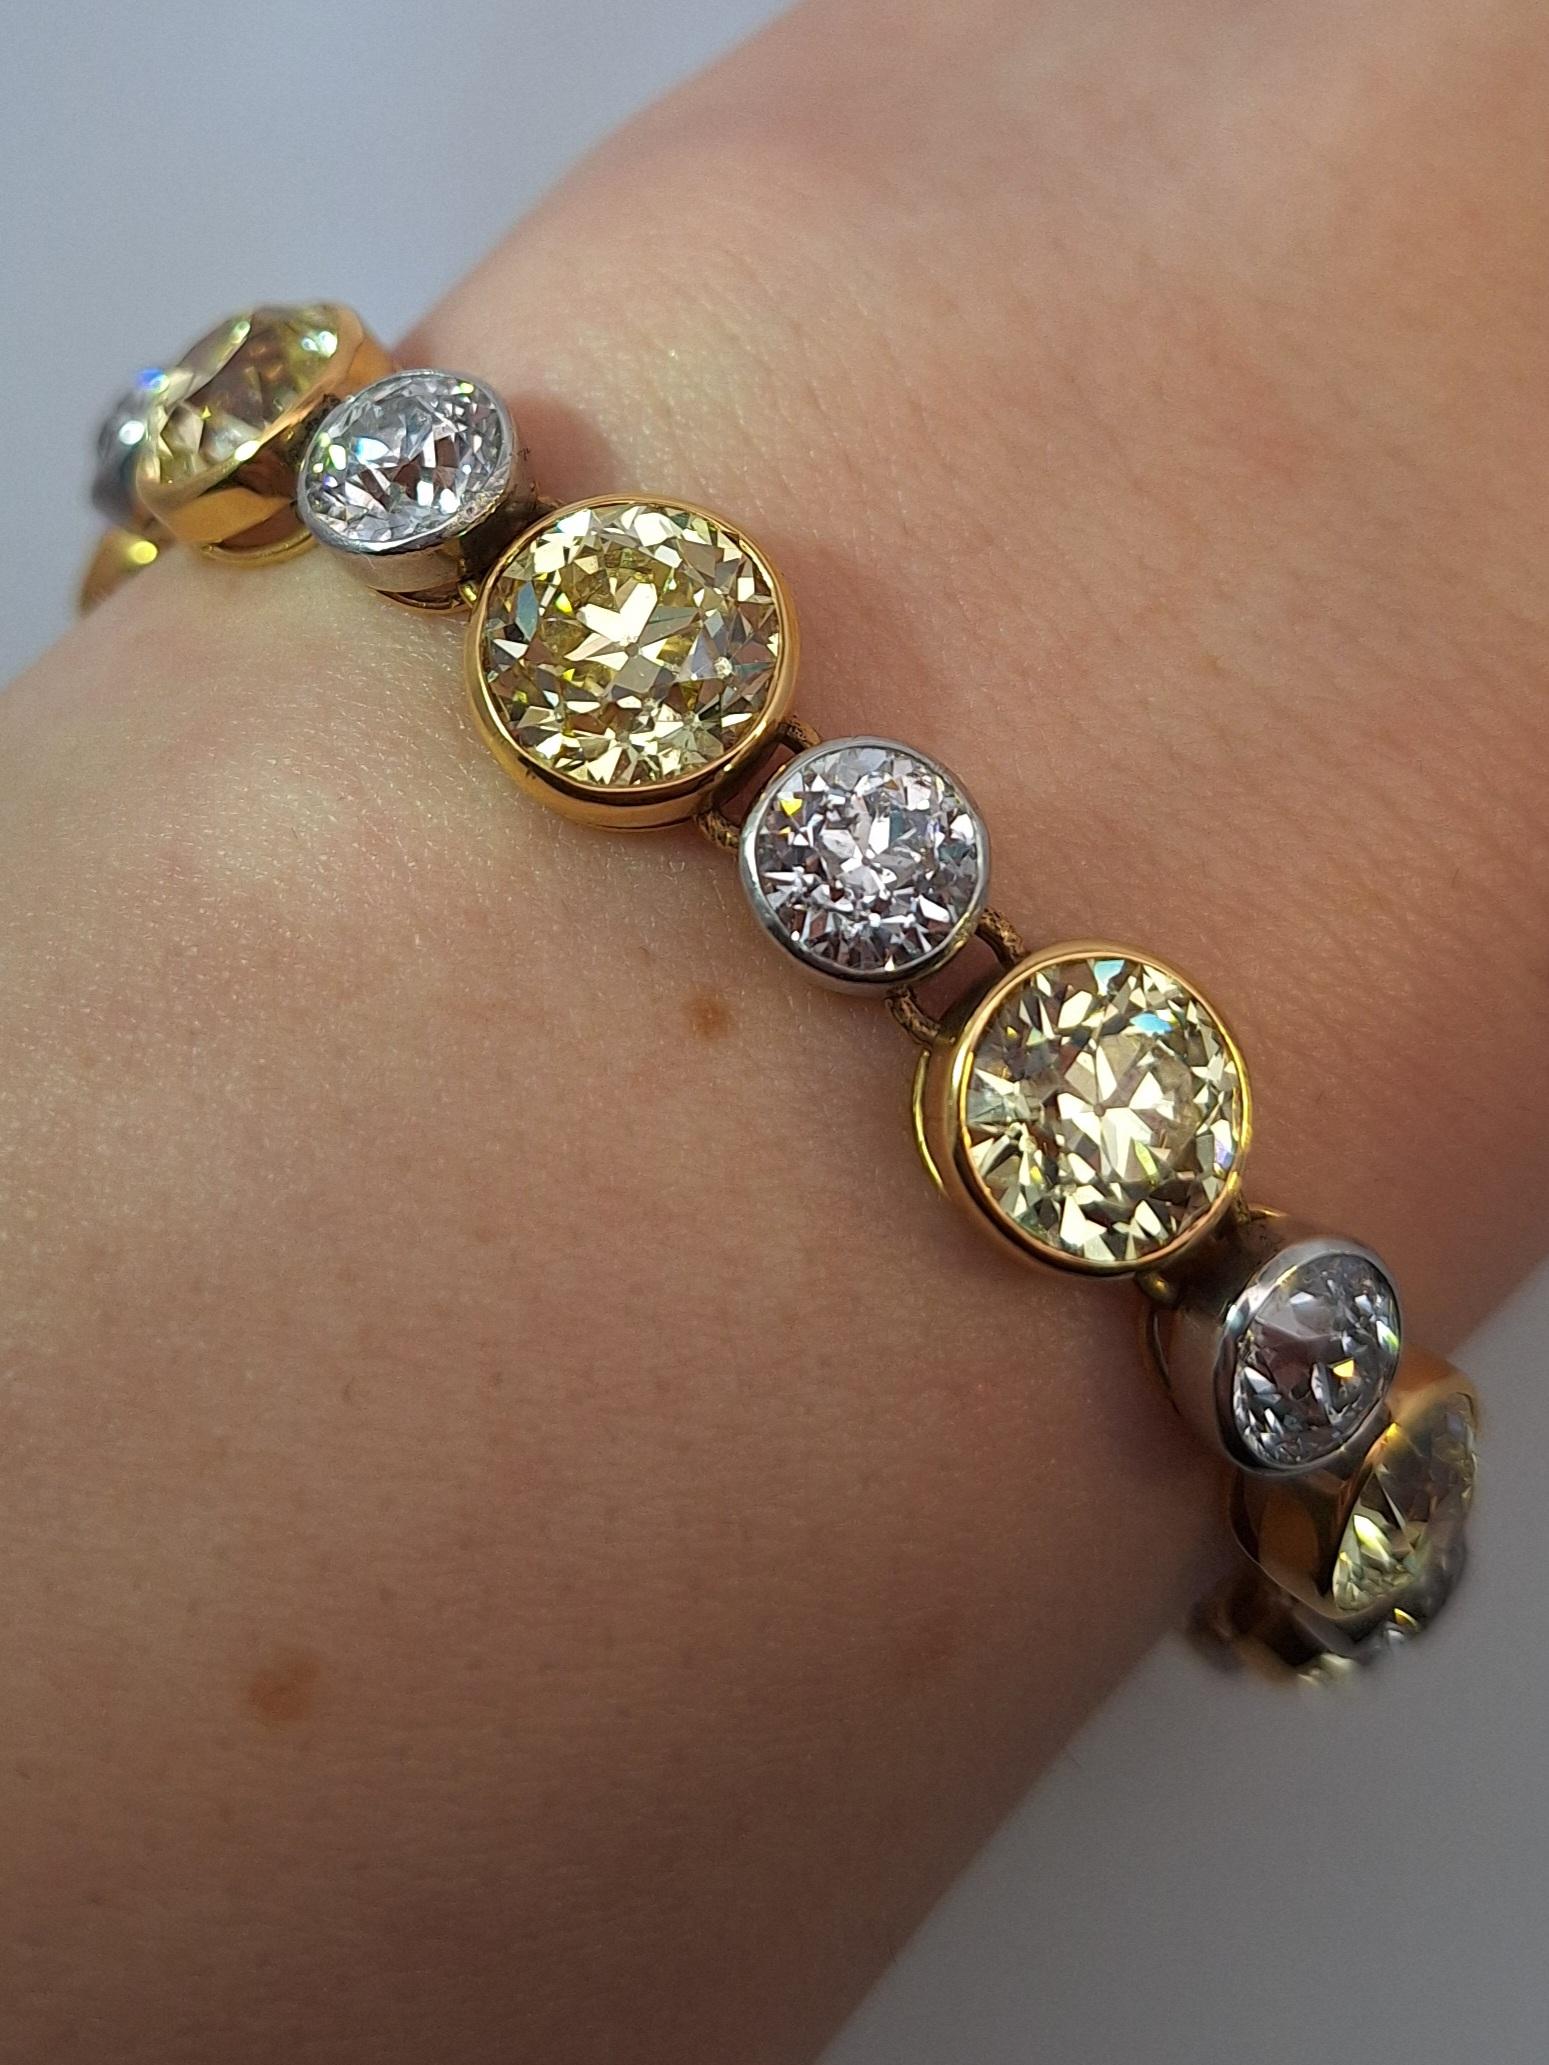 The bracelet of graduated design, set with 12 old European-cut yellow diamonds alternating with 12 old European-cut near colorless diamonds.

GIA reports:
No. 2165486745 stating that the 3.14 carat diamond is Fancy Yellow, Natural Color, VS1